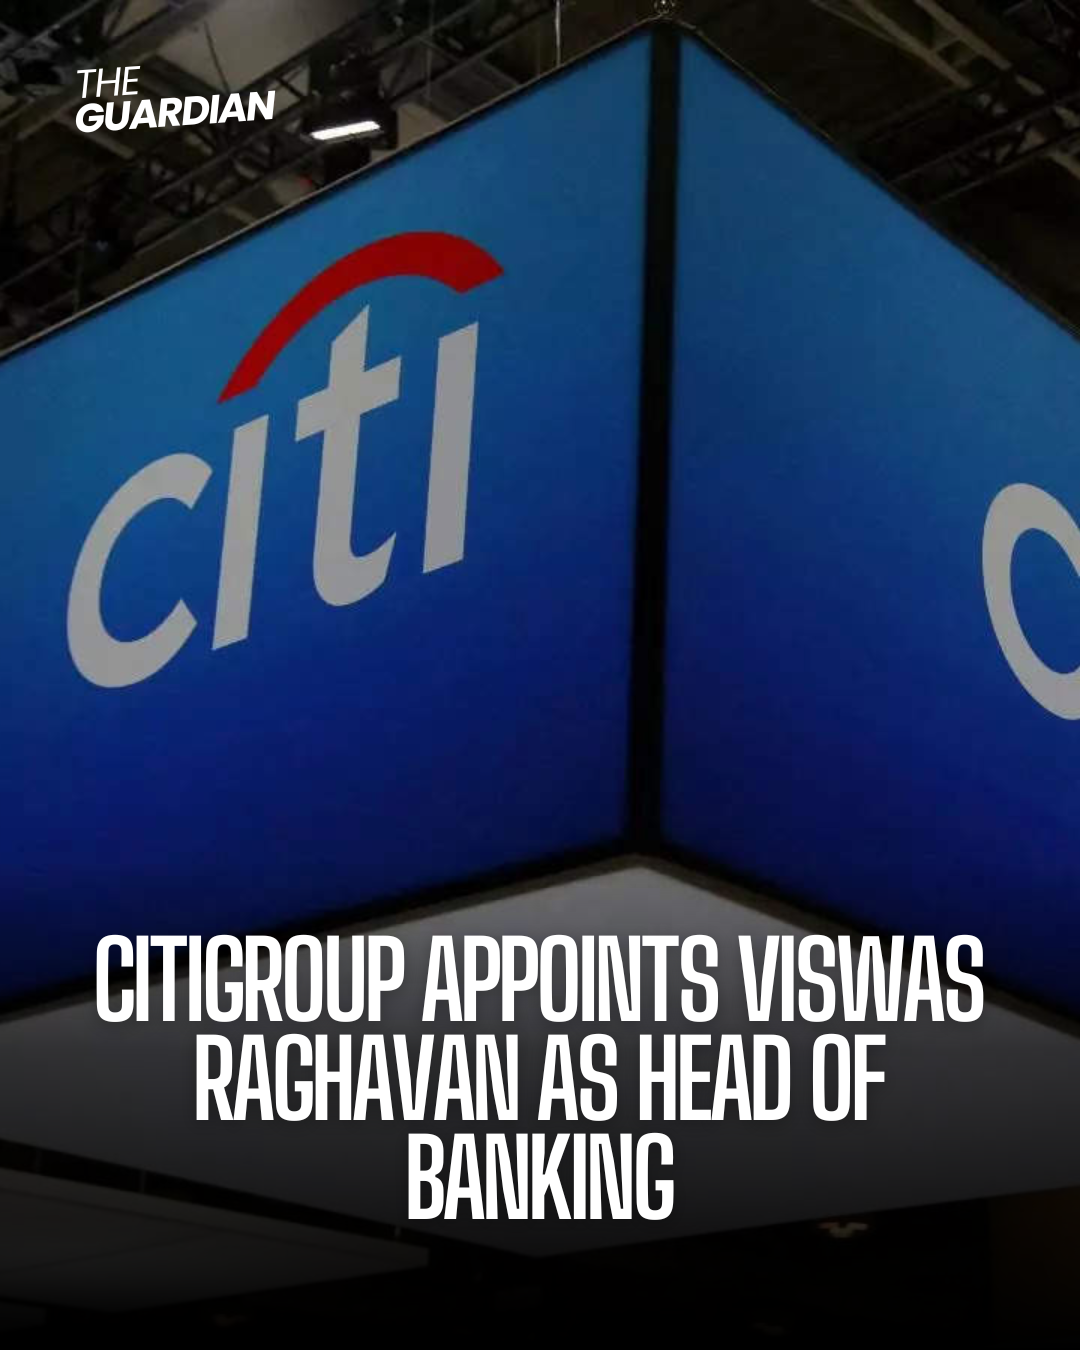 Viswas Raghavan was hired as Citigroup's new head of banking following a management restructuring at JPMorgan Chase.